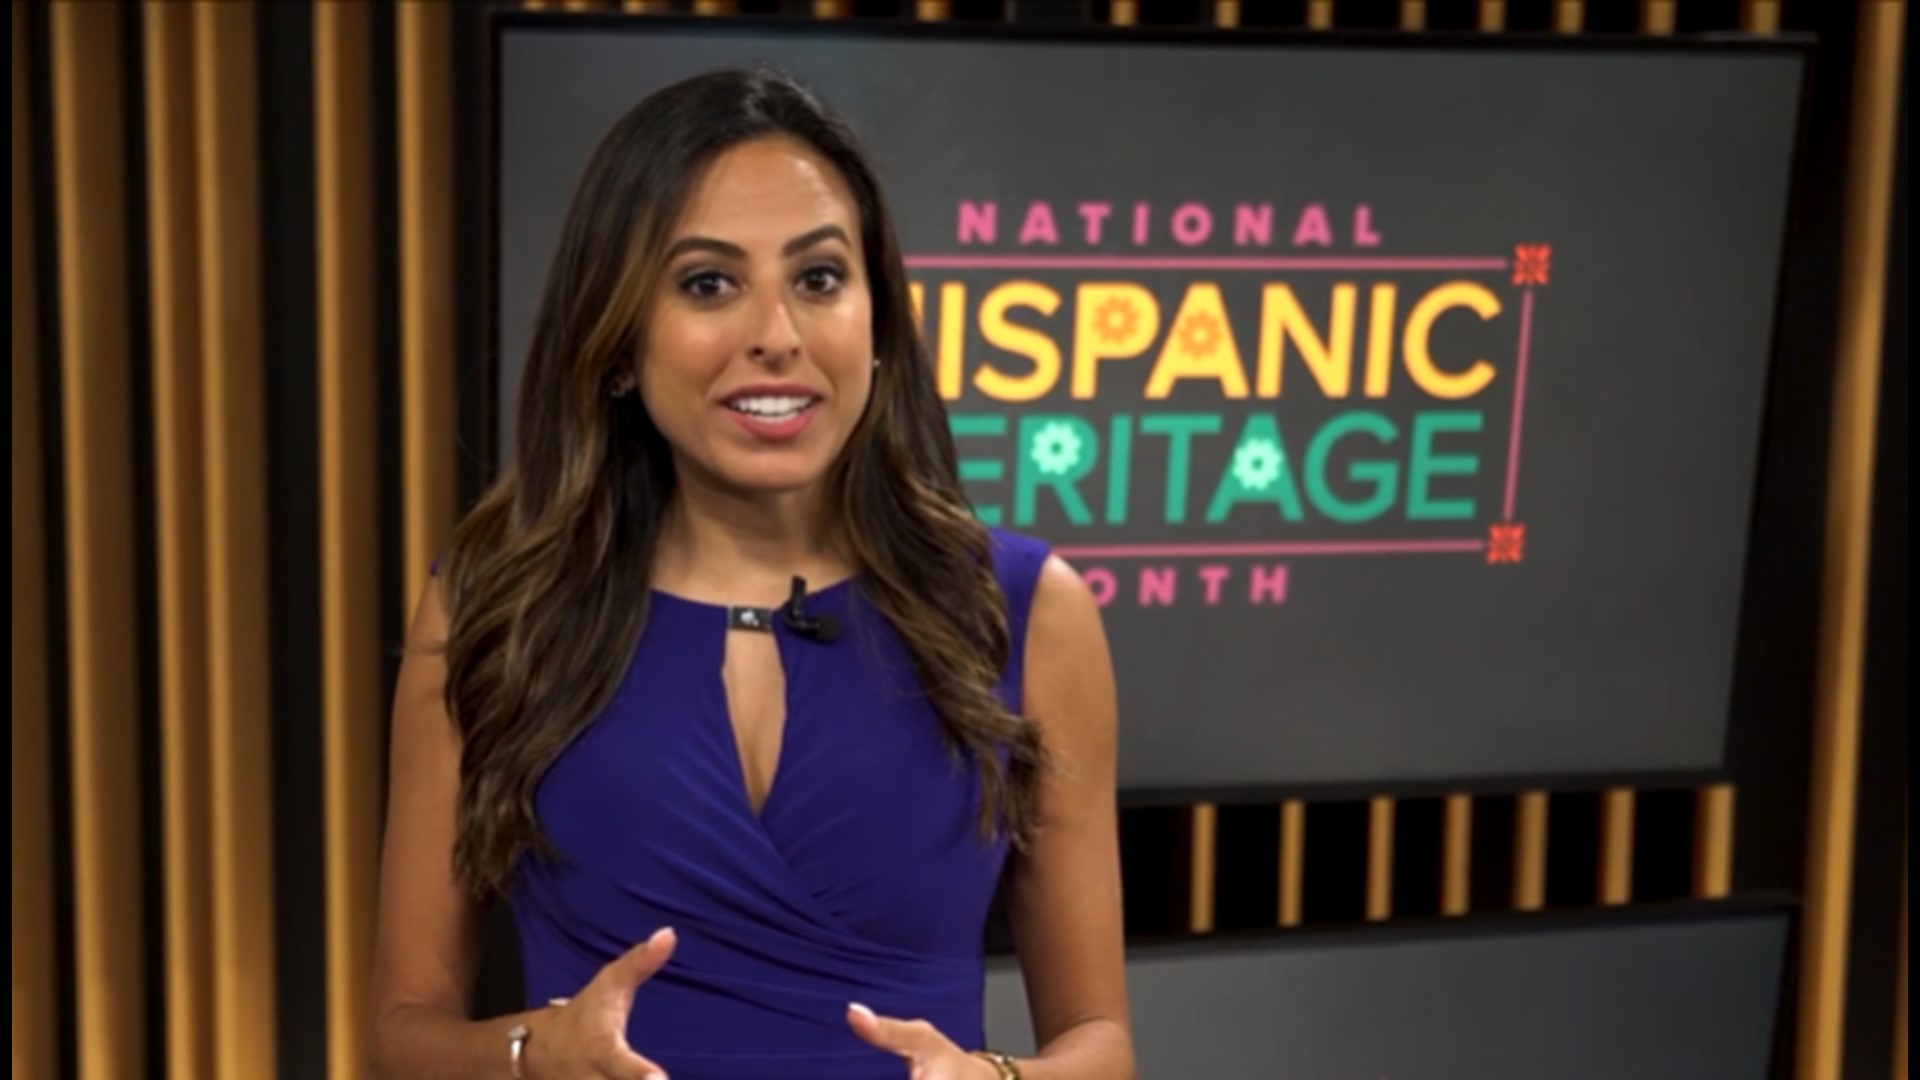 This is an 11Alive "Voices for Equality" special, celebrating Hispanic Heritage Month, hosted and reported by Paola Suro.